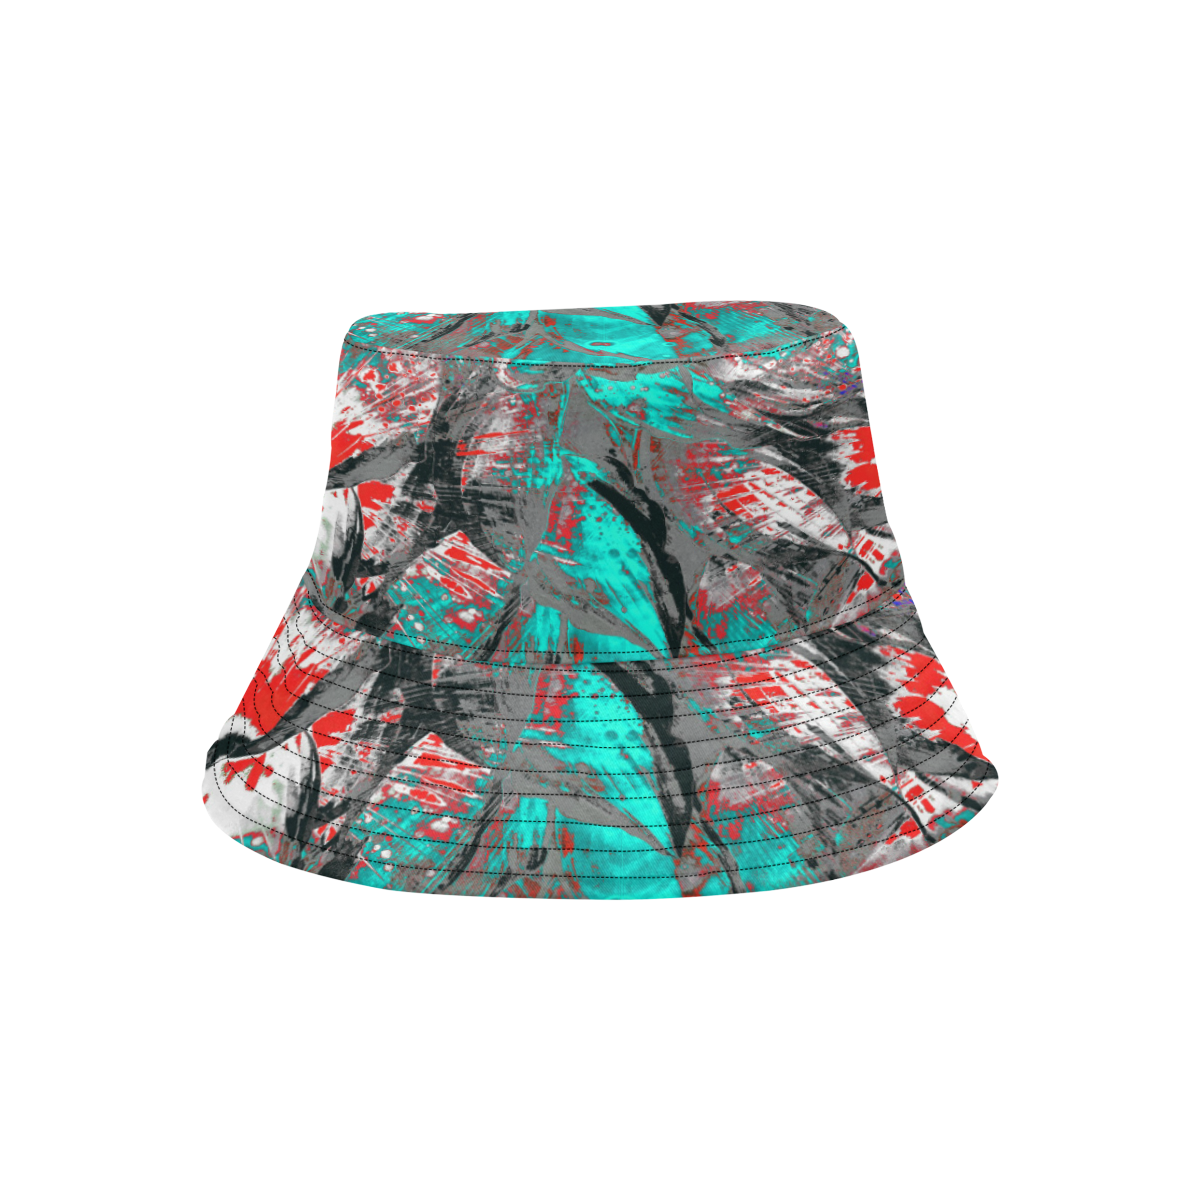 wheelVibe2_8500 3 low All Over Print Bucket Hat for Men